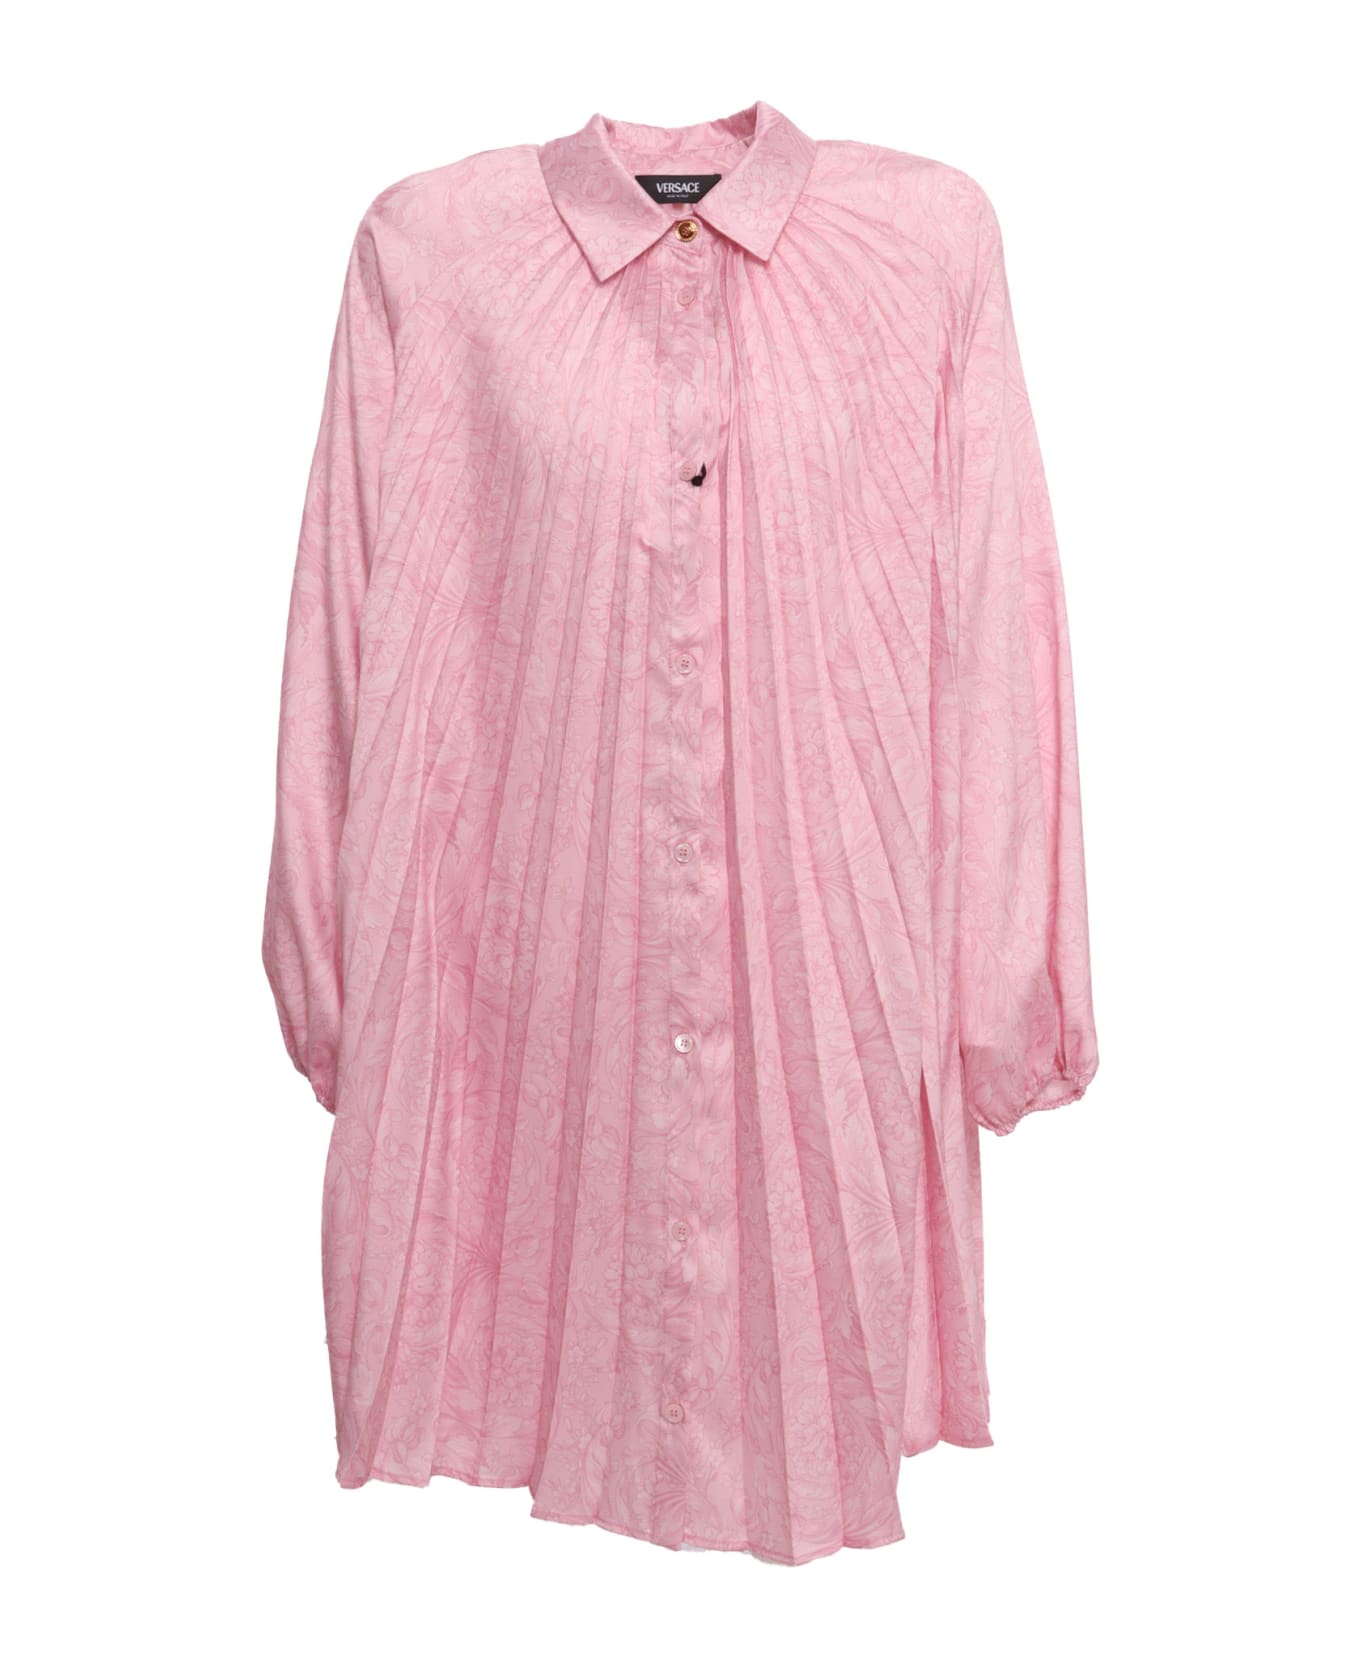 Versace Pink Baroque Style Shirt - PINK